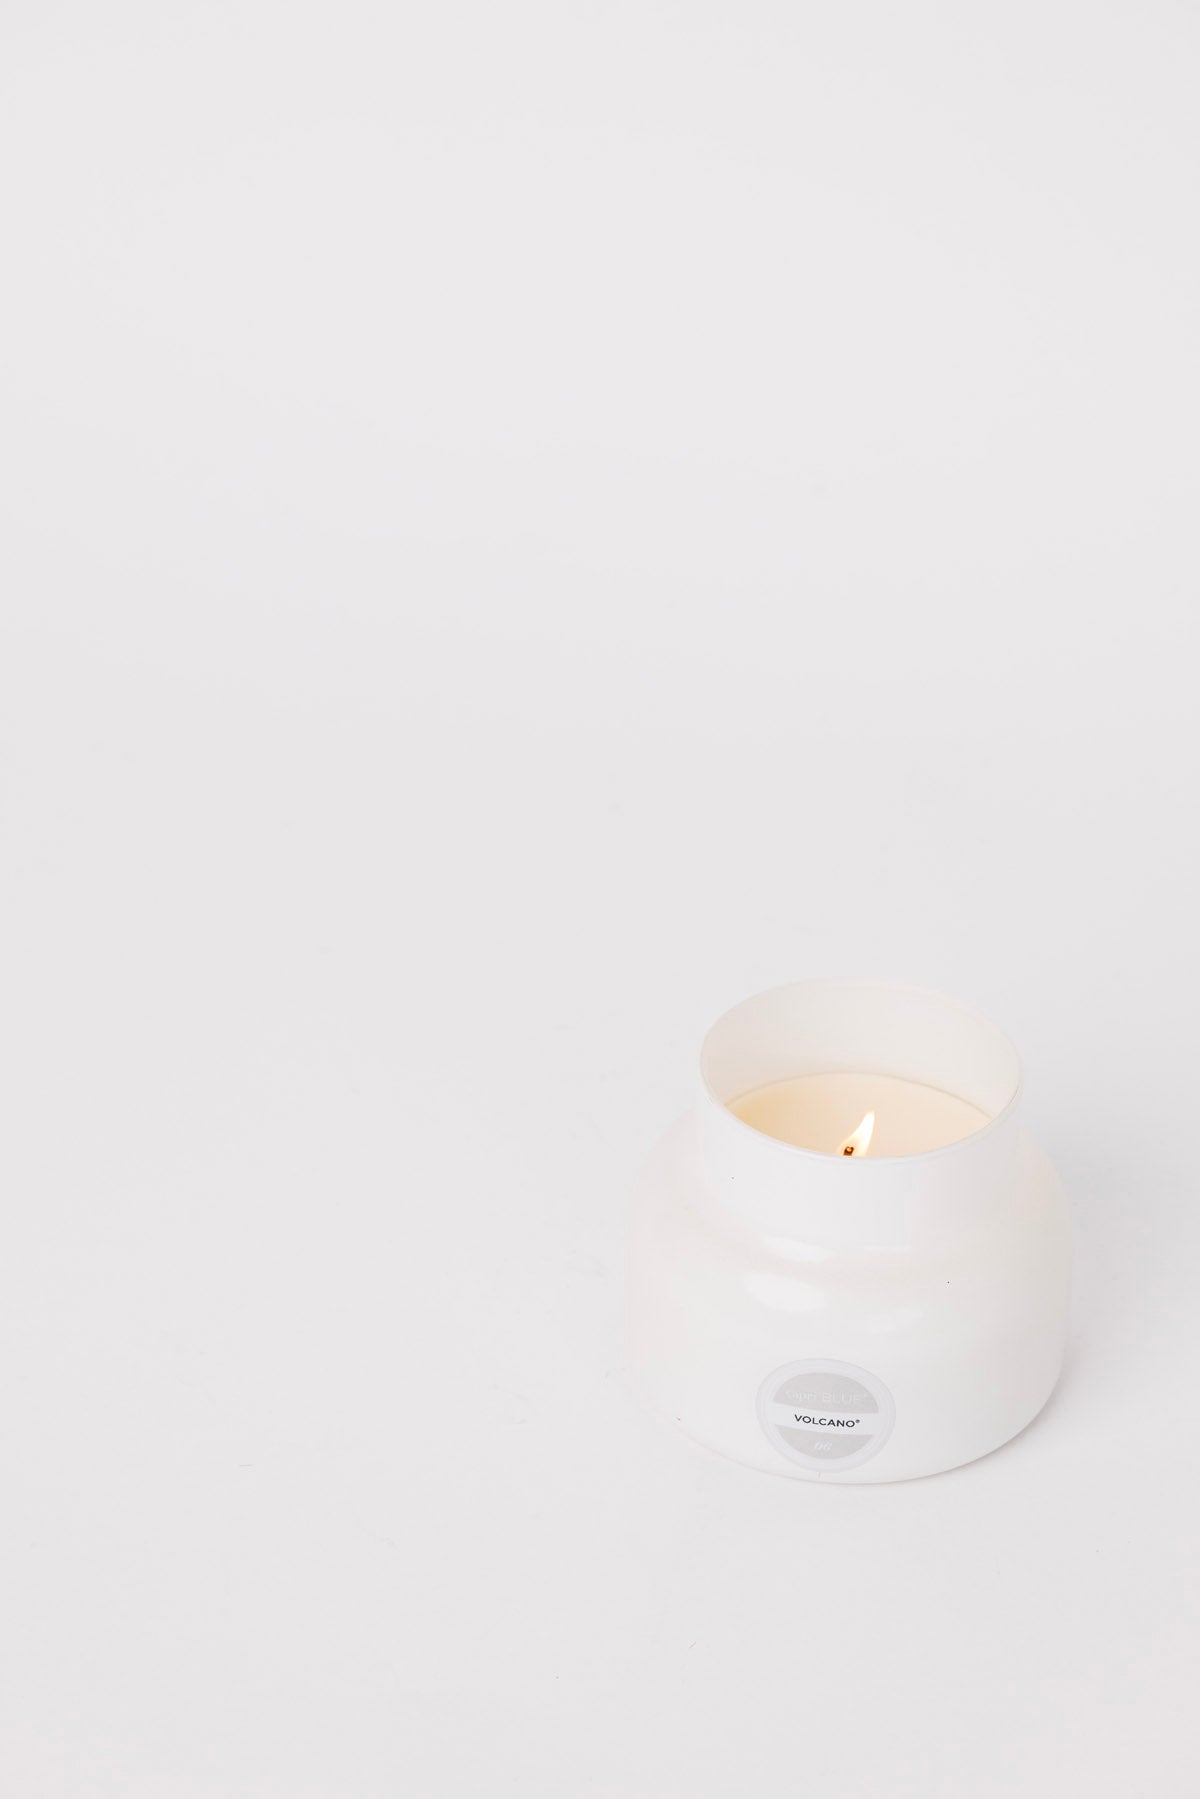 Adored Volcano Candle - 2 Sizes